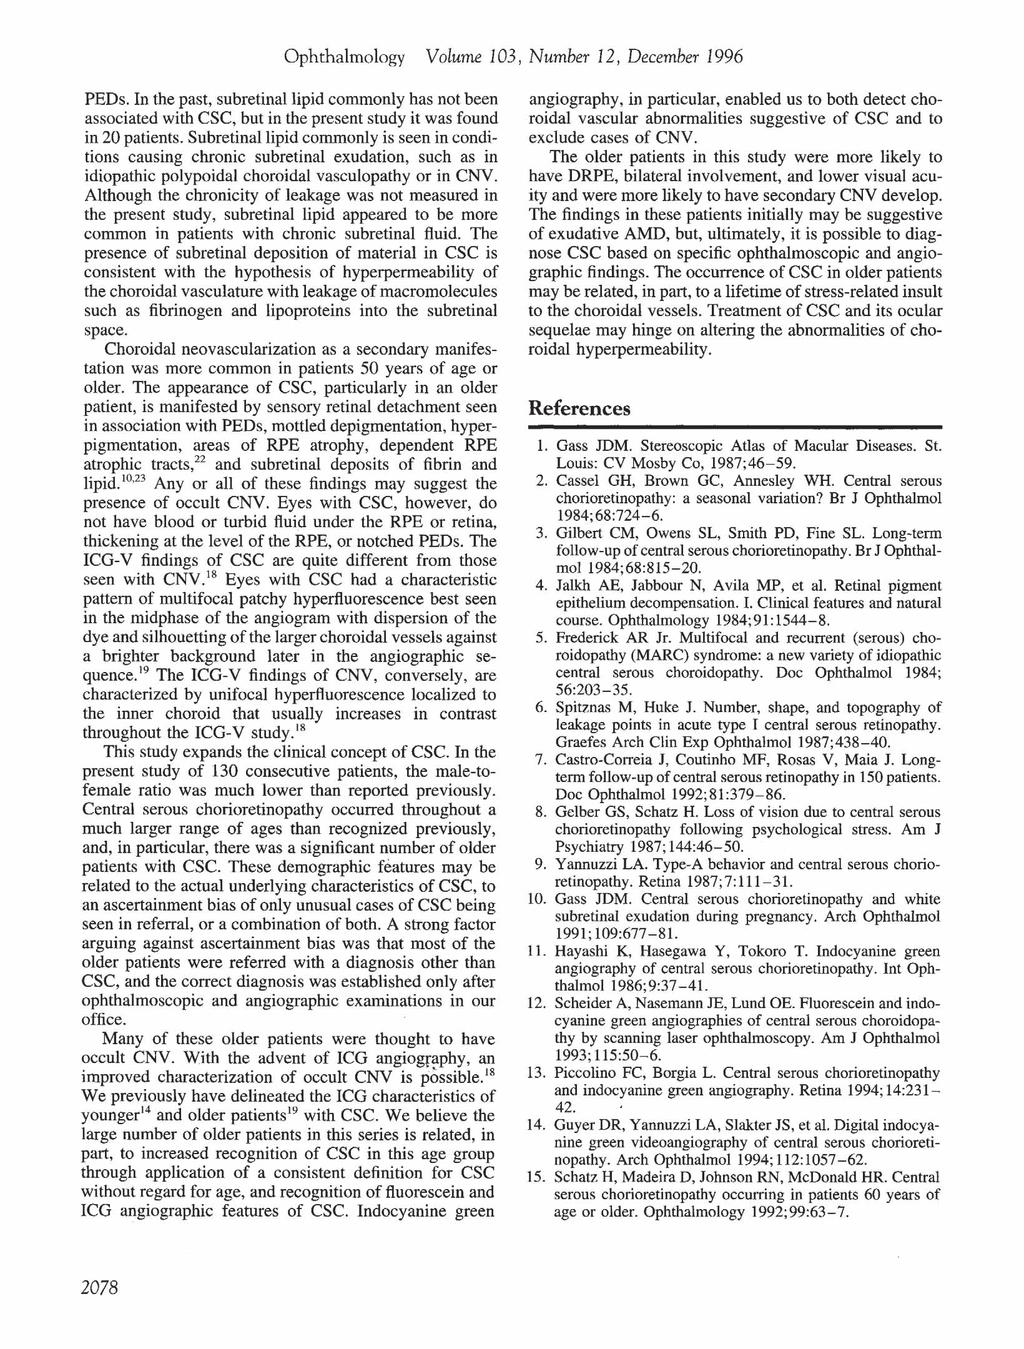 Ophthalmology Volume 103, Number 12, December 1996 PEDs. In the past, subretinallipid commonly has not been associated with esc, but in the present study it was found in 20 patients.